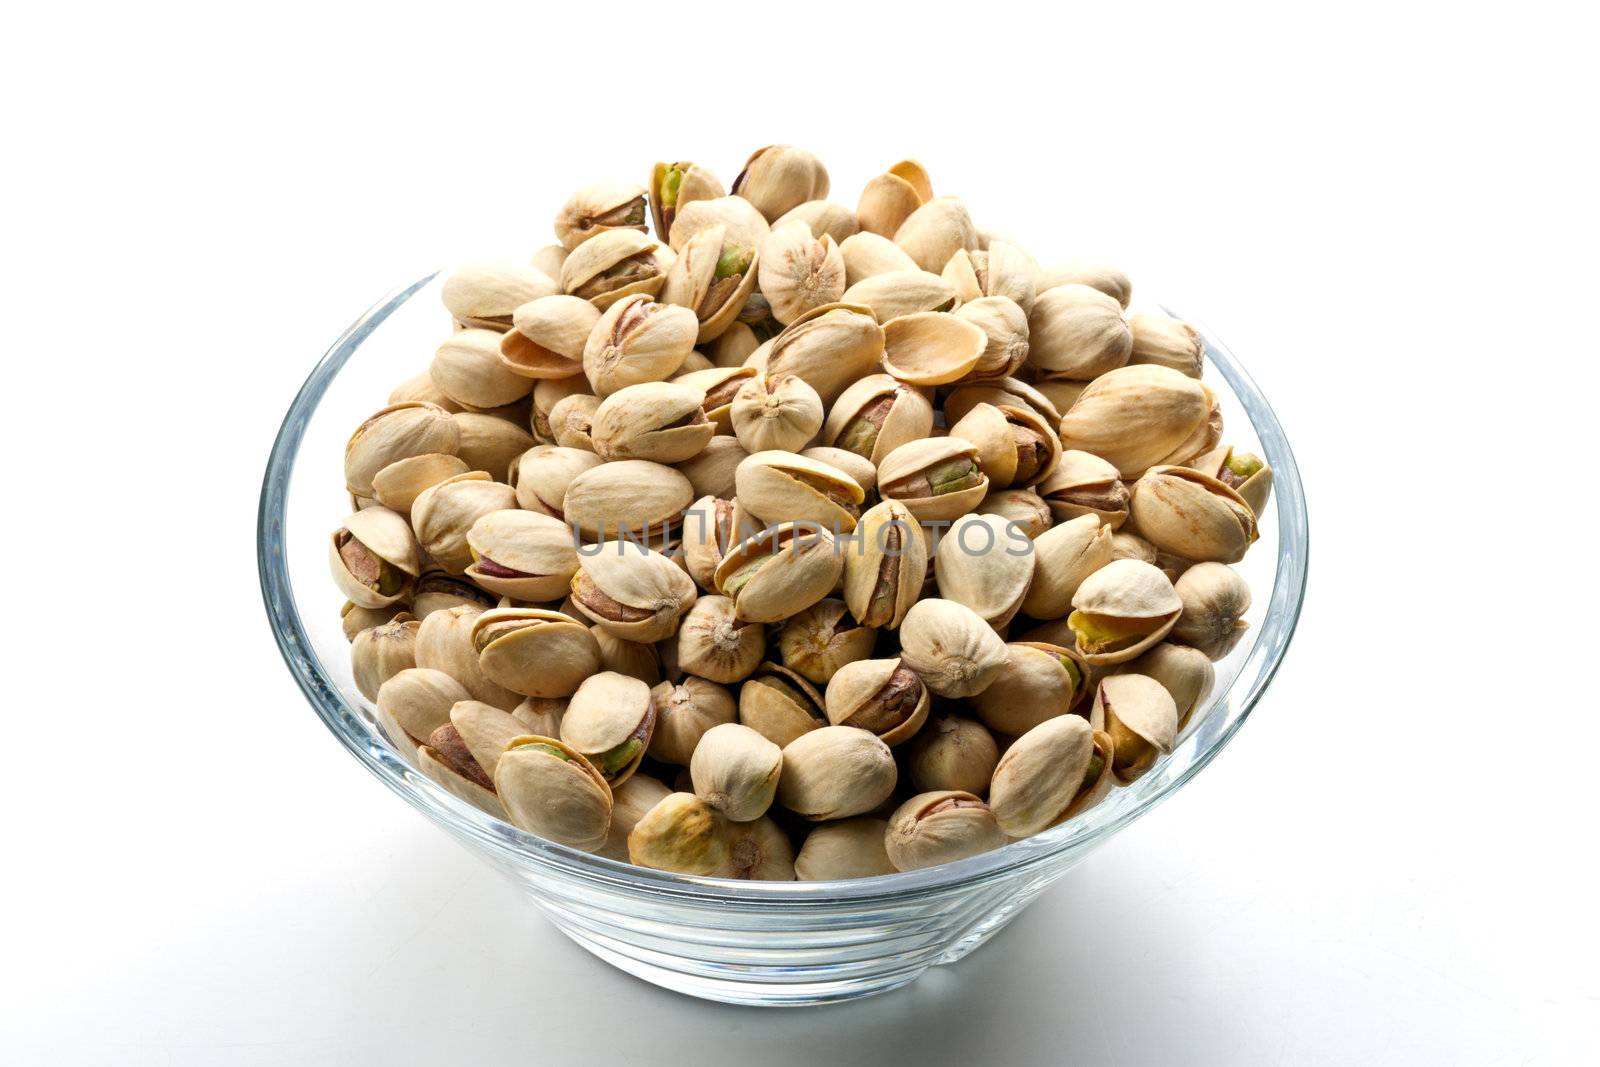 Pistachios nuts in glass bowl by lavsen